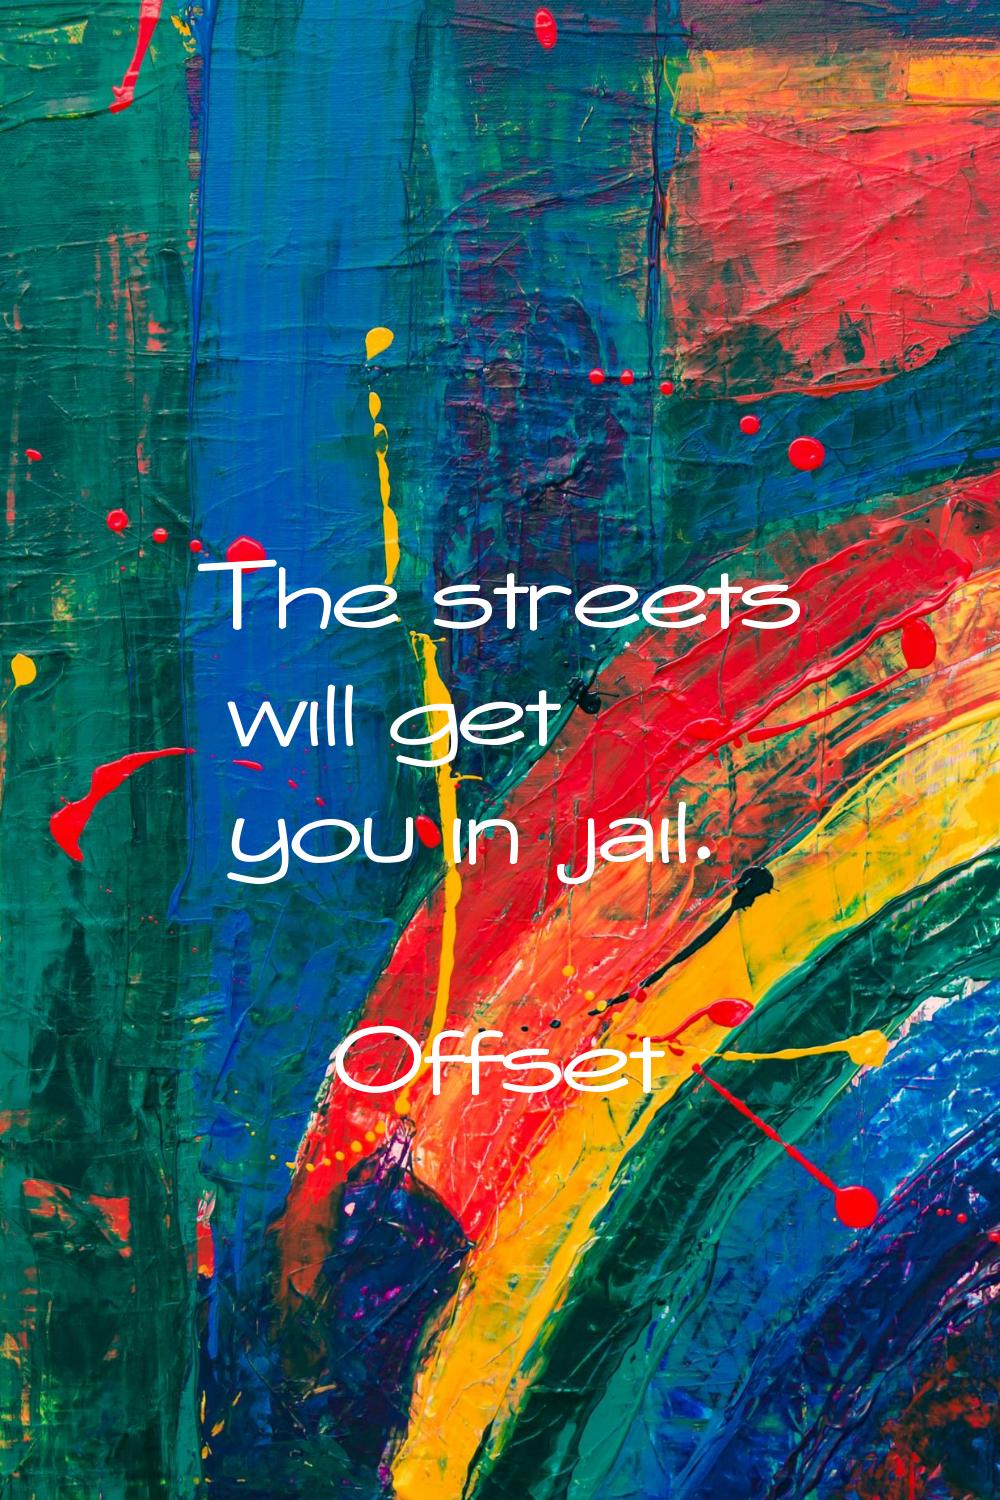 The streets will get you in jail.